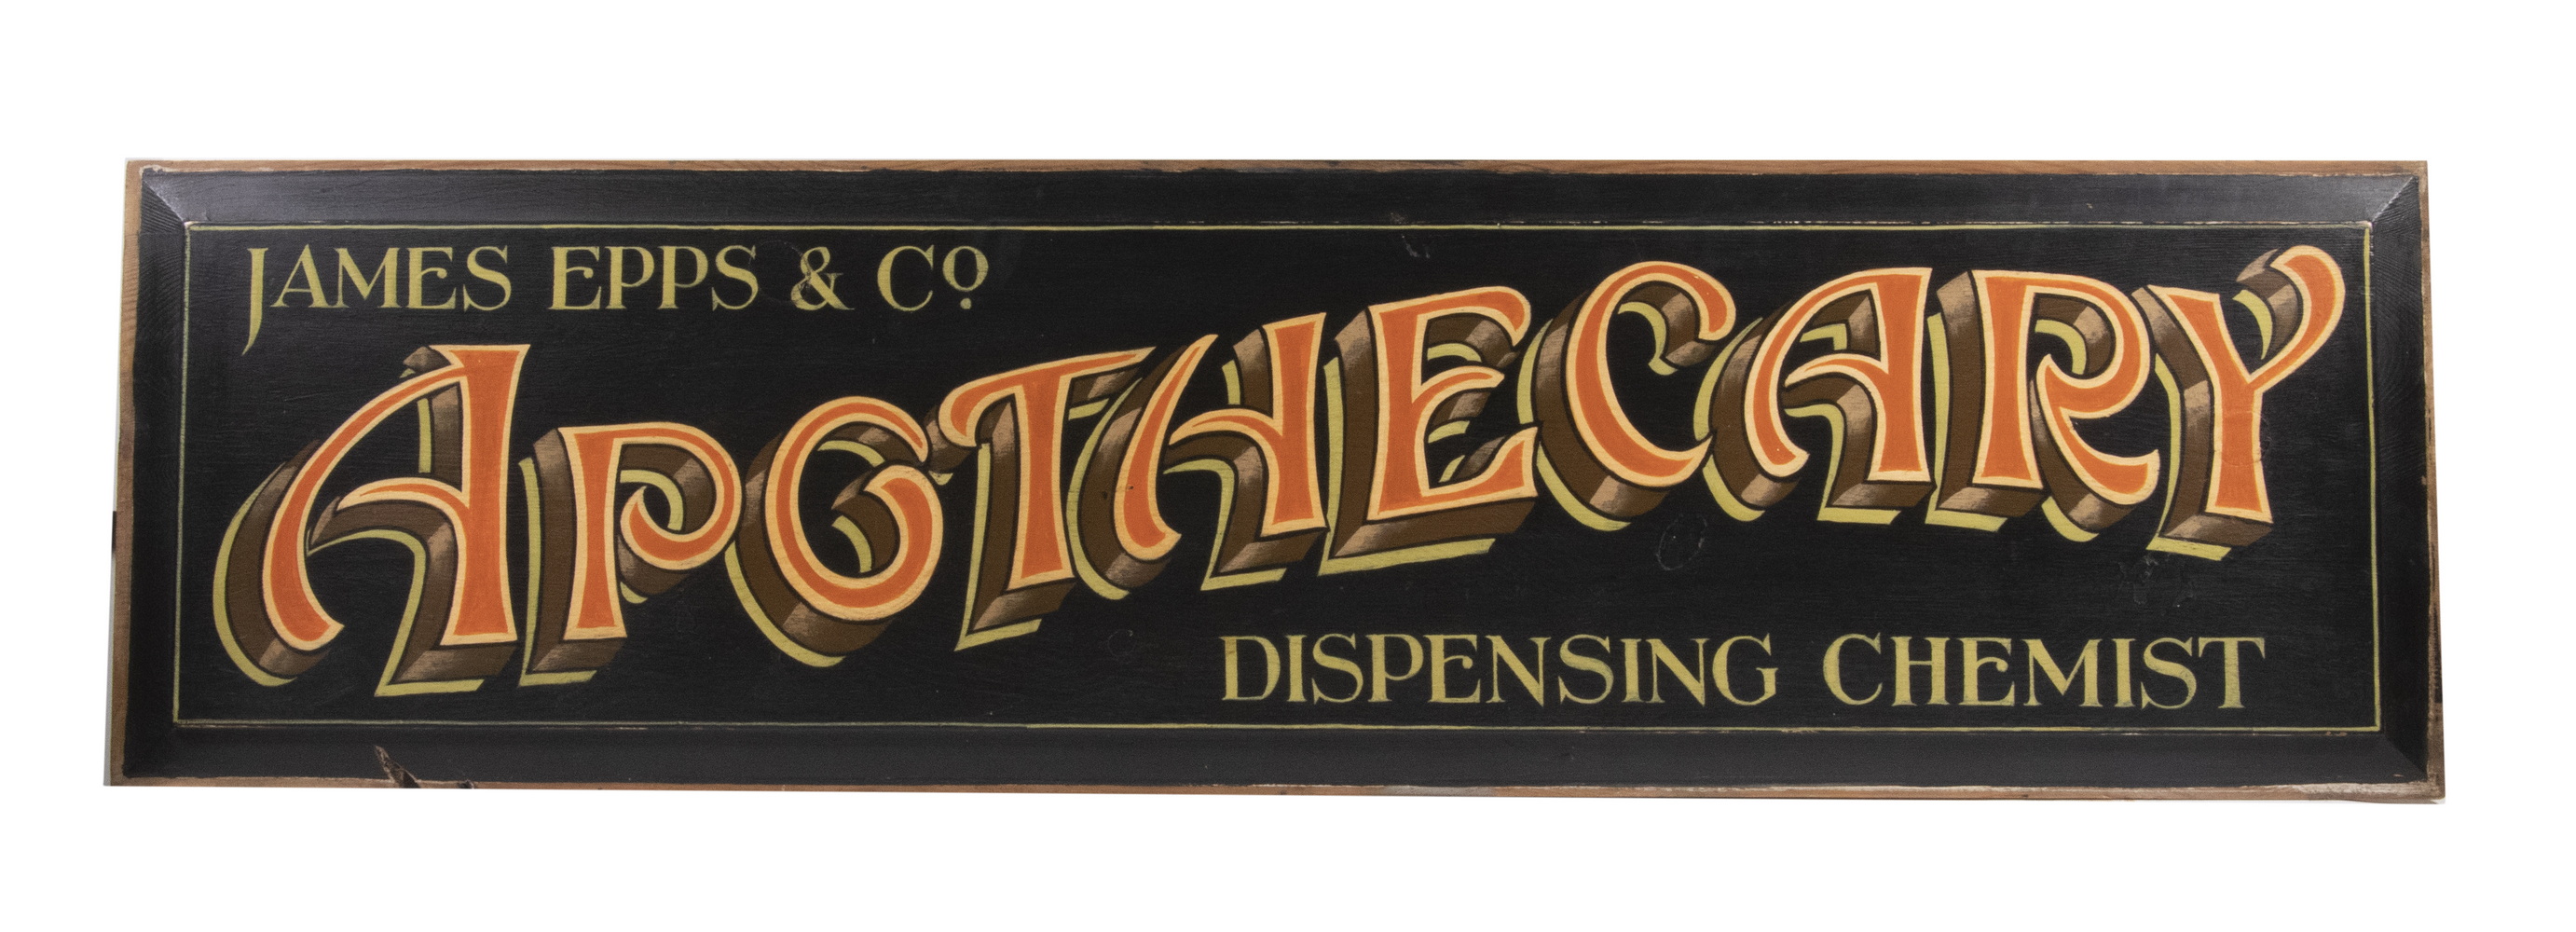 APOTHECARY SIGN Painted Mitered 3027a3